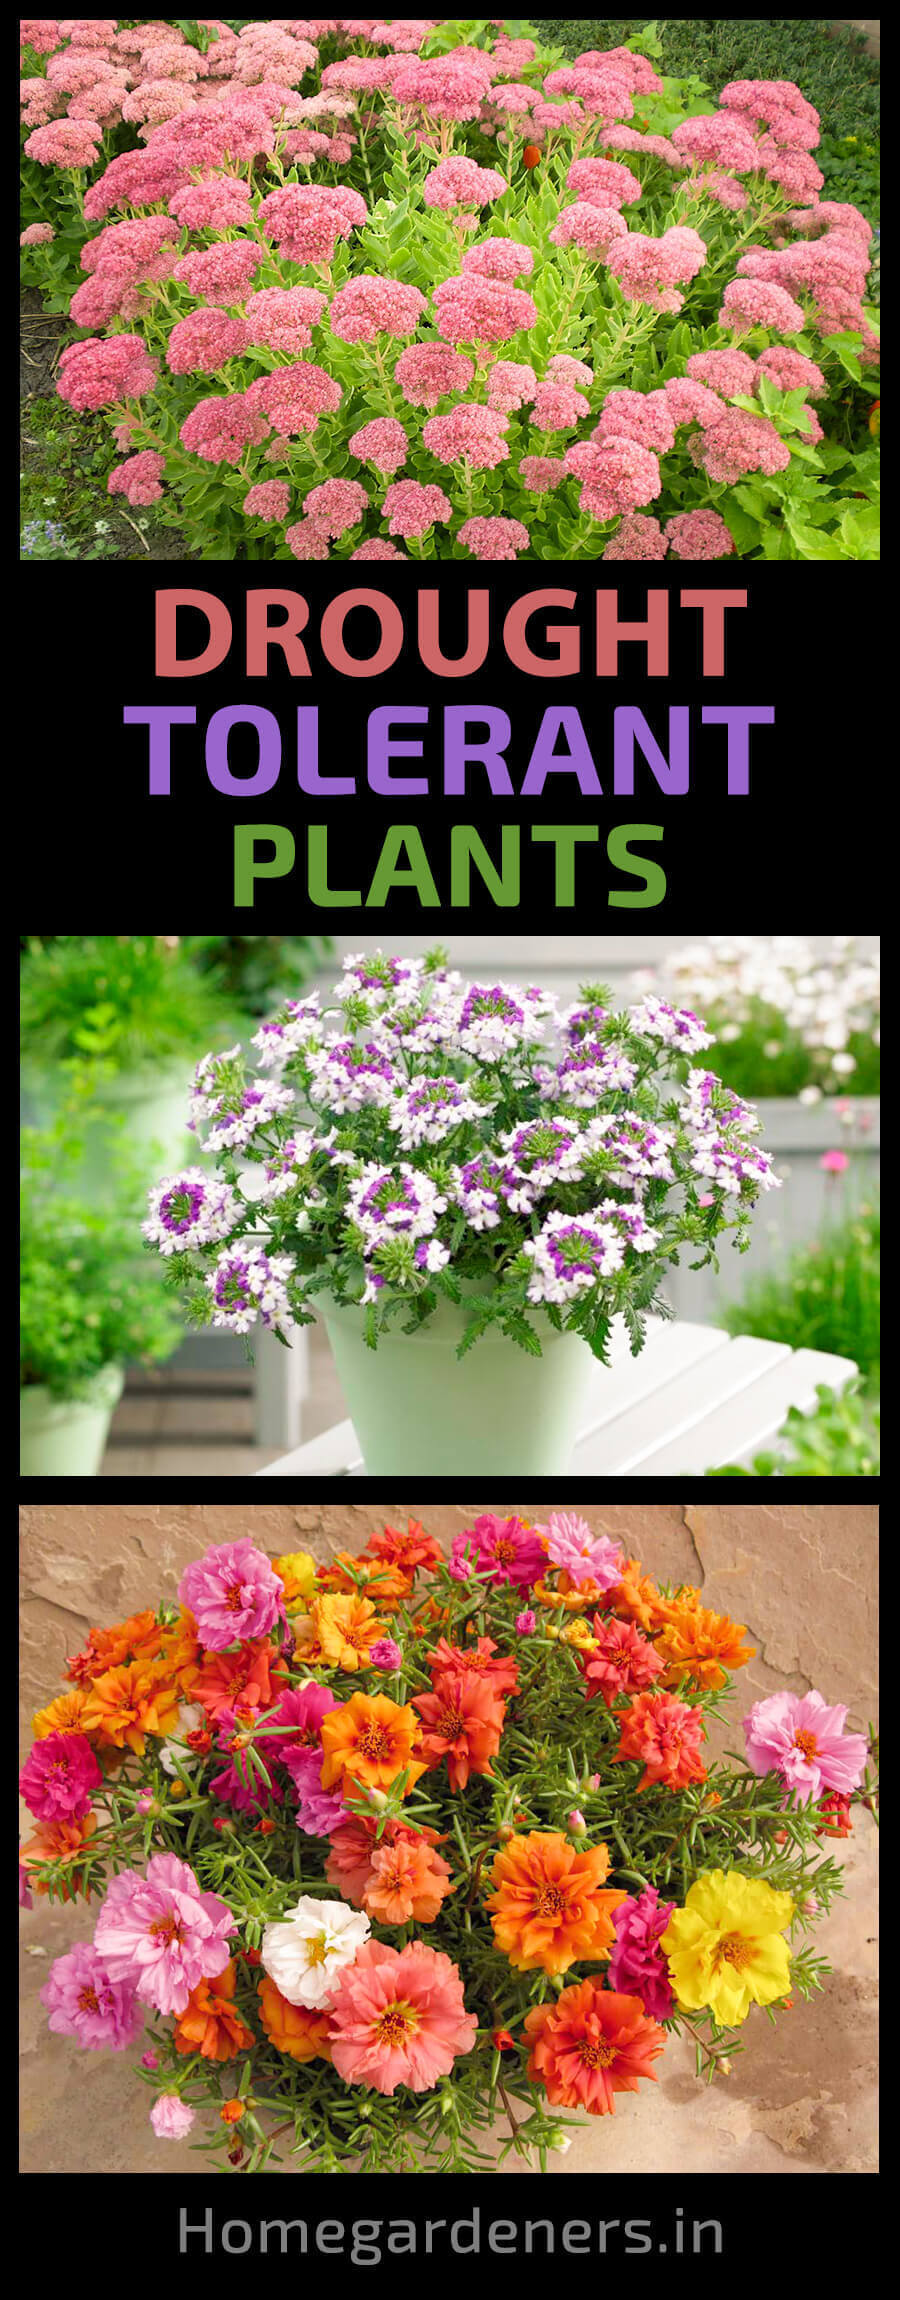 The 10 Best Drought Tolerant Plants that Grow in Lack of Water -   12 plants Home drought tolerant ideas